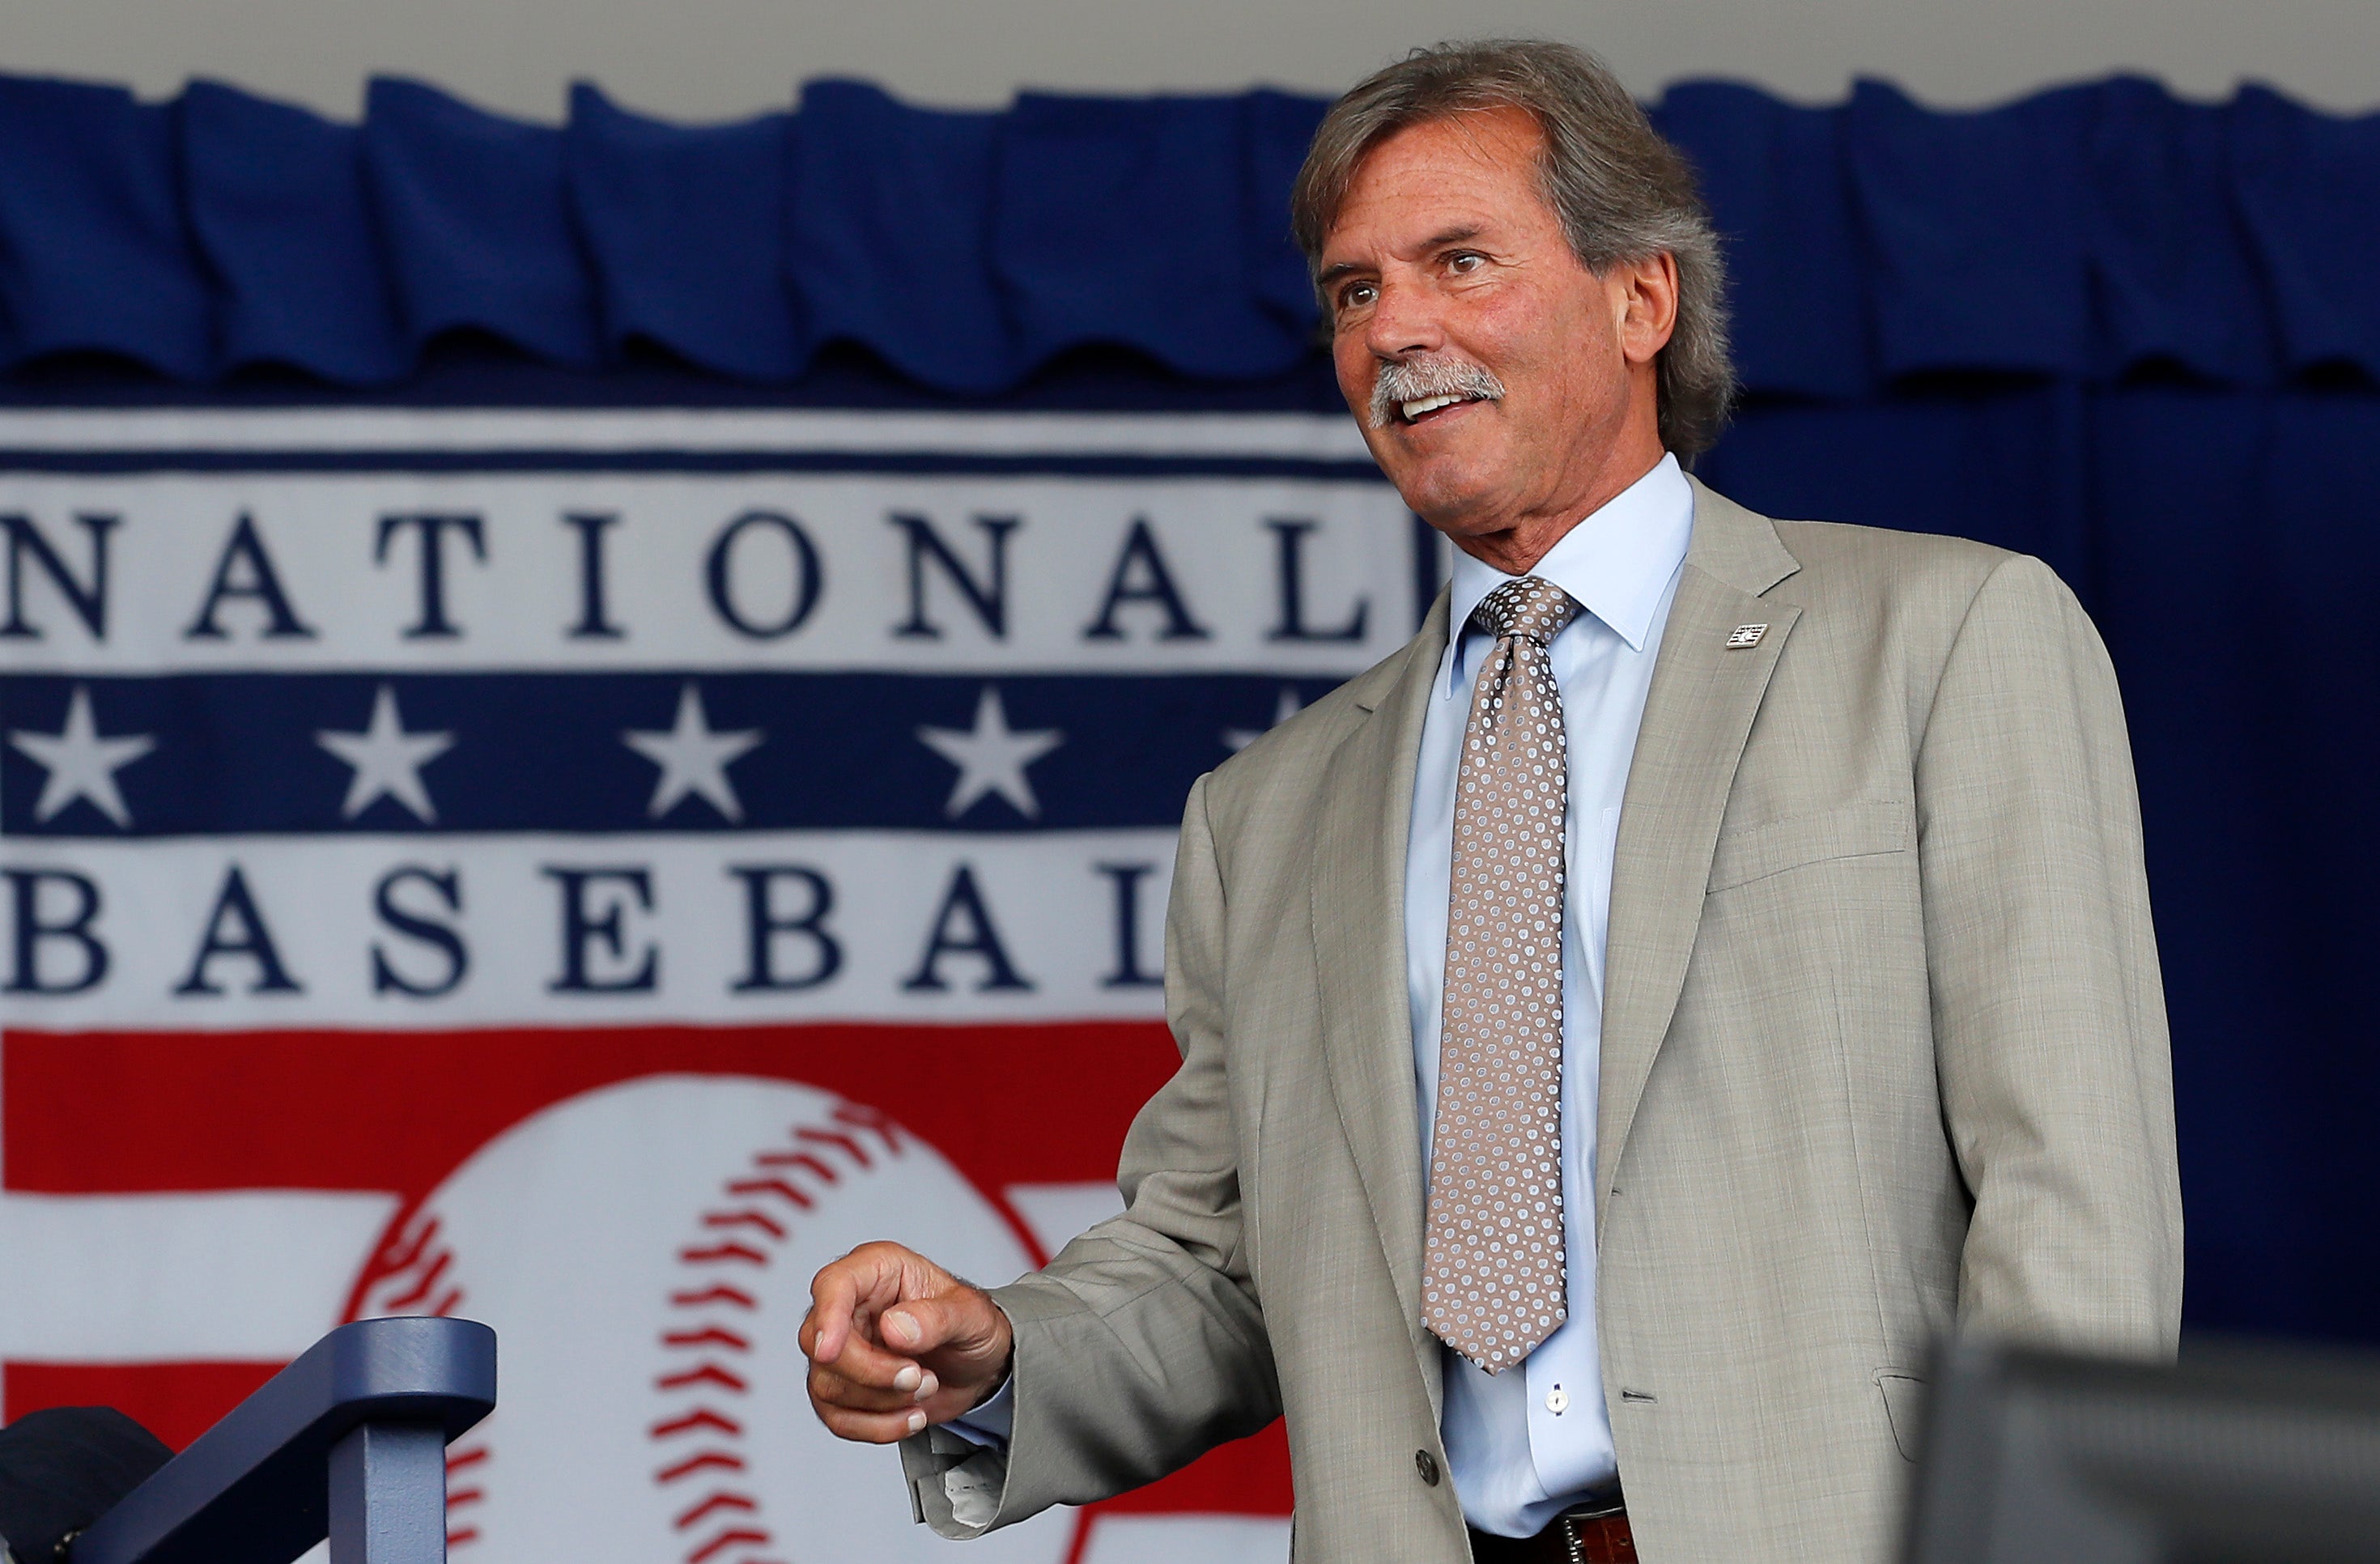 MLB Hall of Famer, Red Sox legend Dennis Eckersley, retires from broadcasting